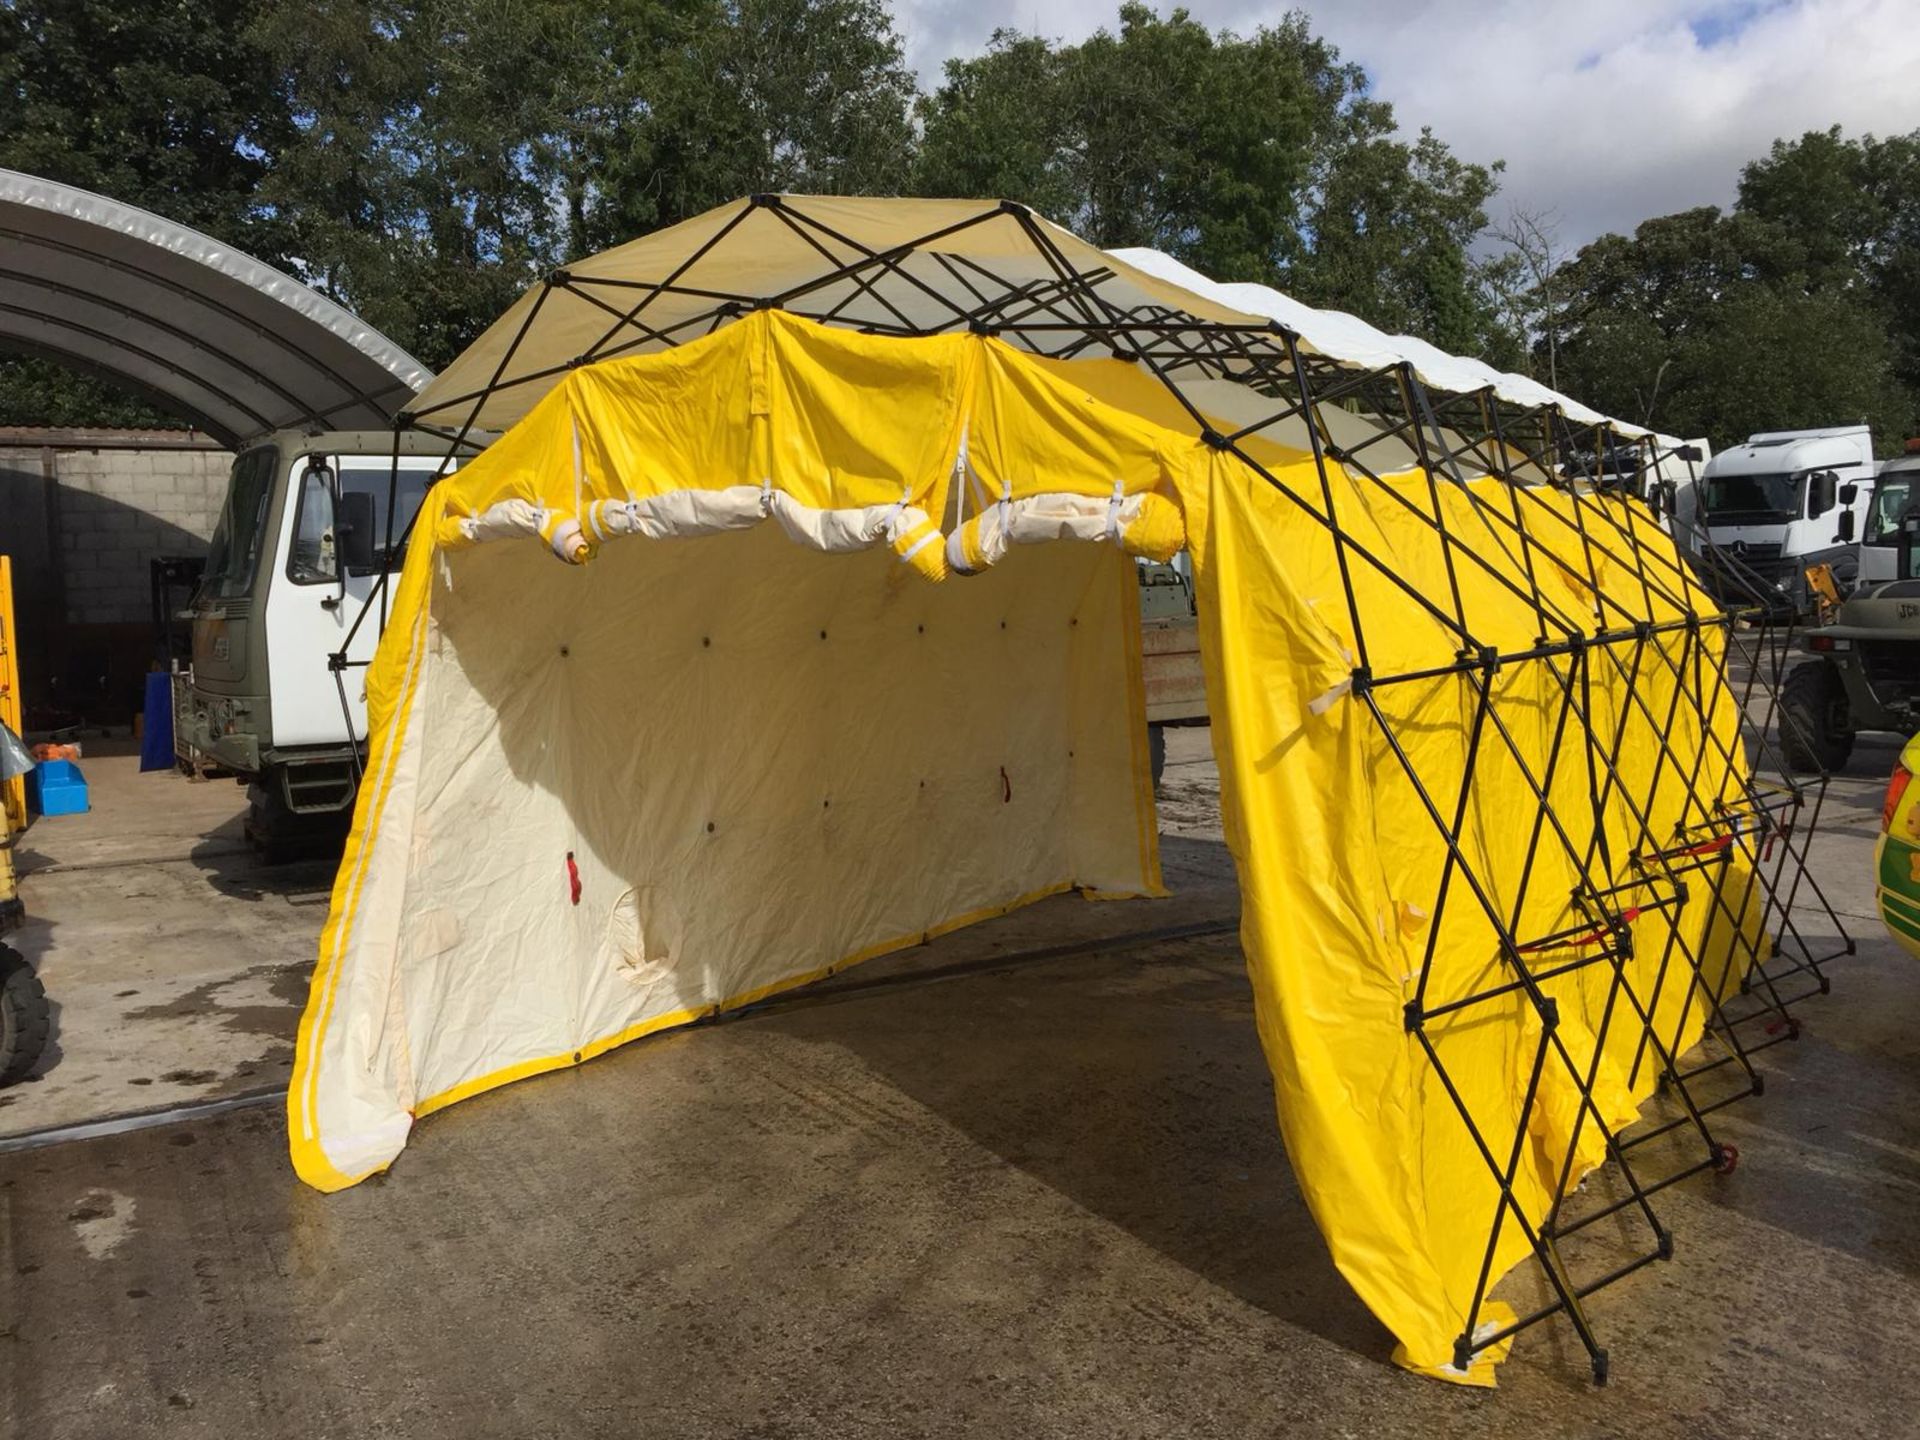 2 - U6 decontamination undress shelters ** Ex Fire and Rescue service** - Image 3 of 3